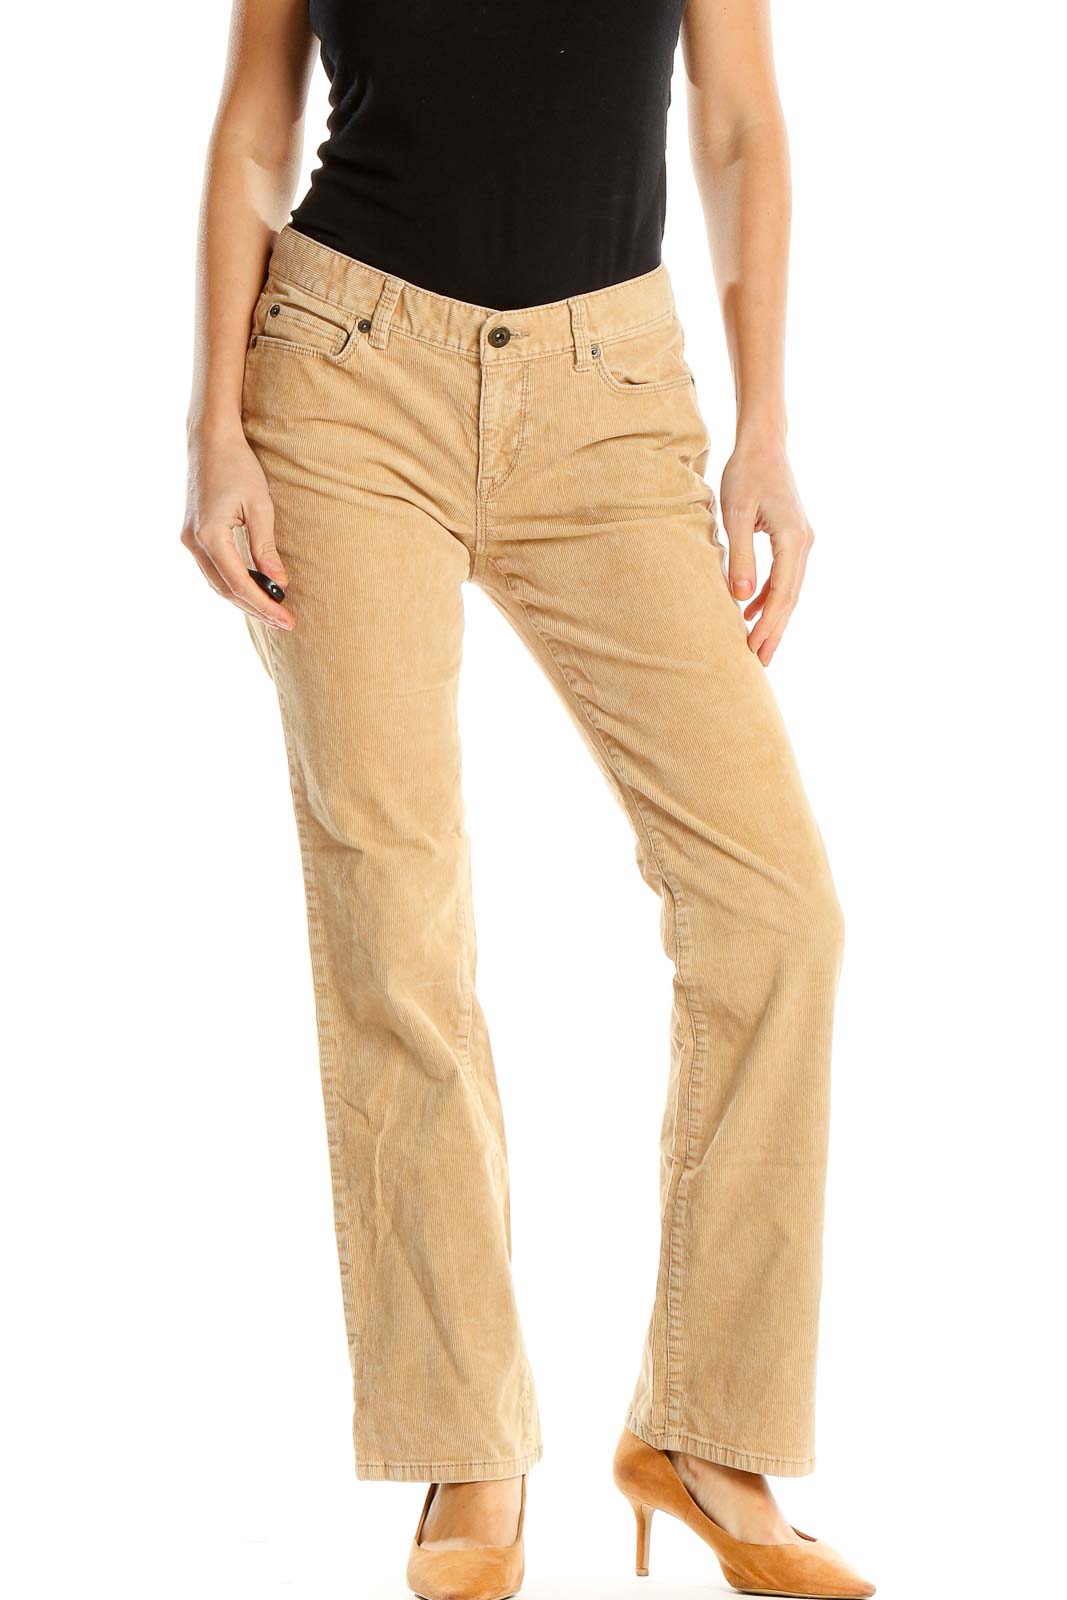 Beige Corduroy Textured Casual Trousers Front